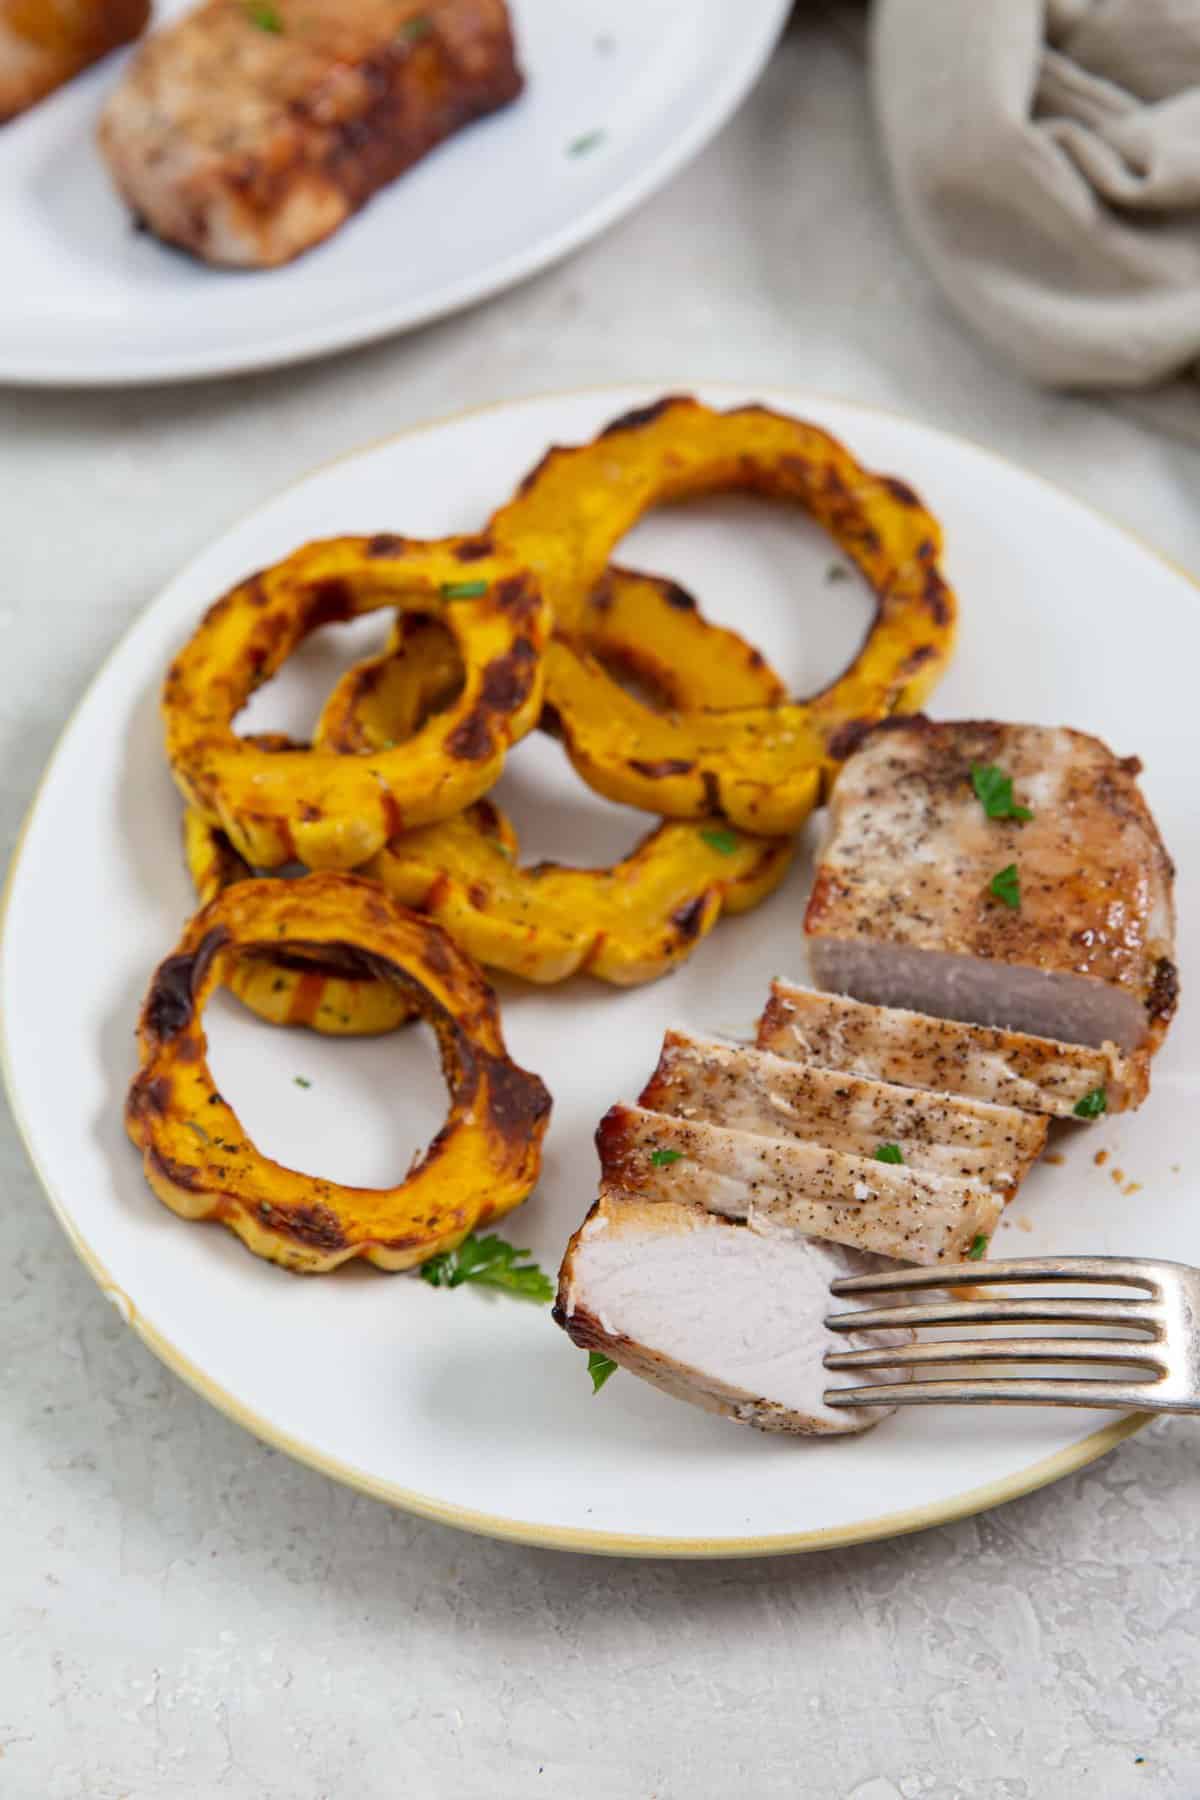 Sliced thick pork chop on a white plate with squash rounds.